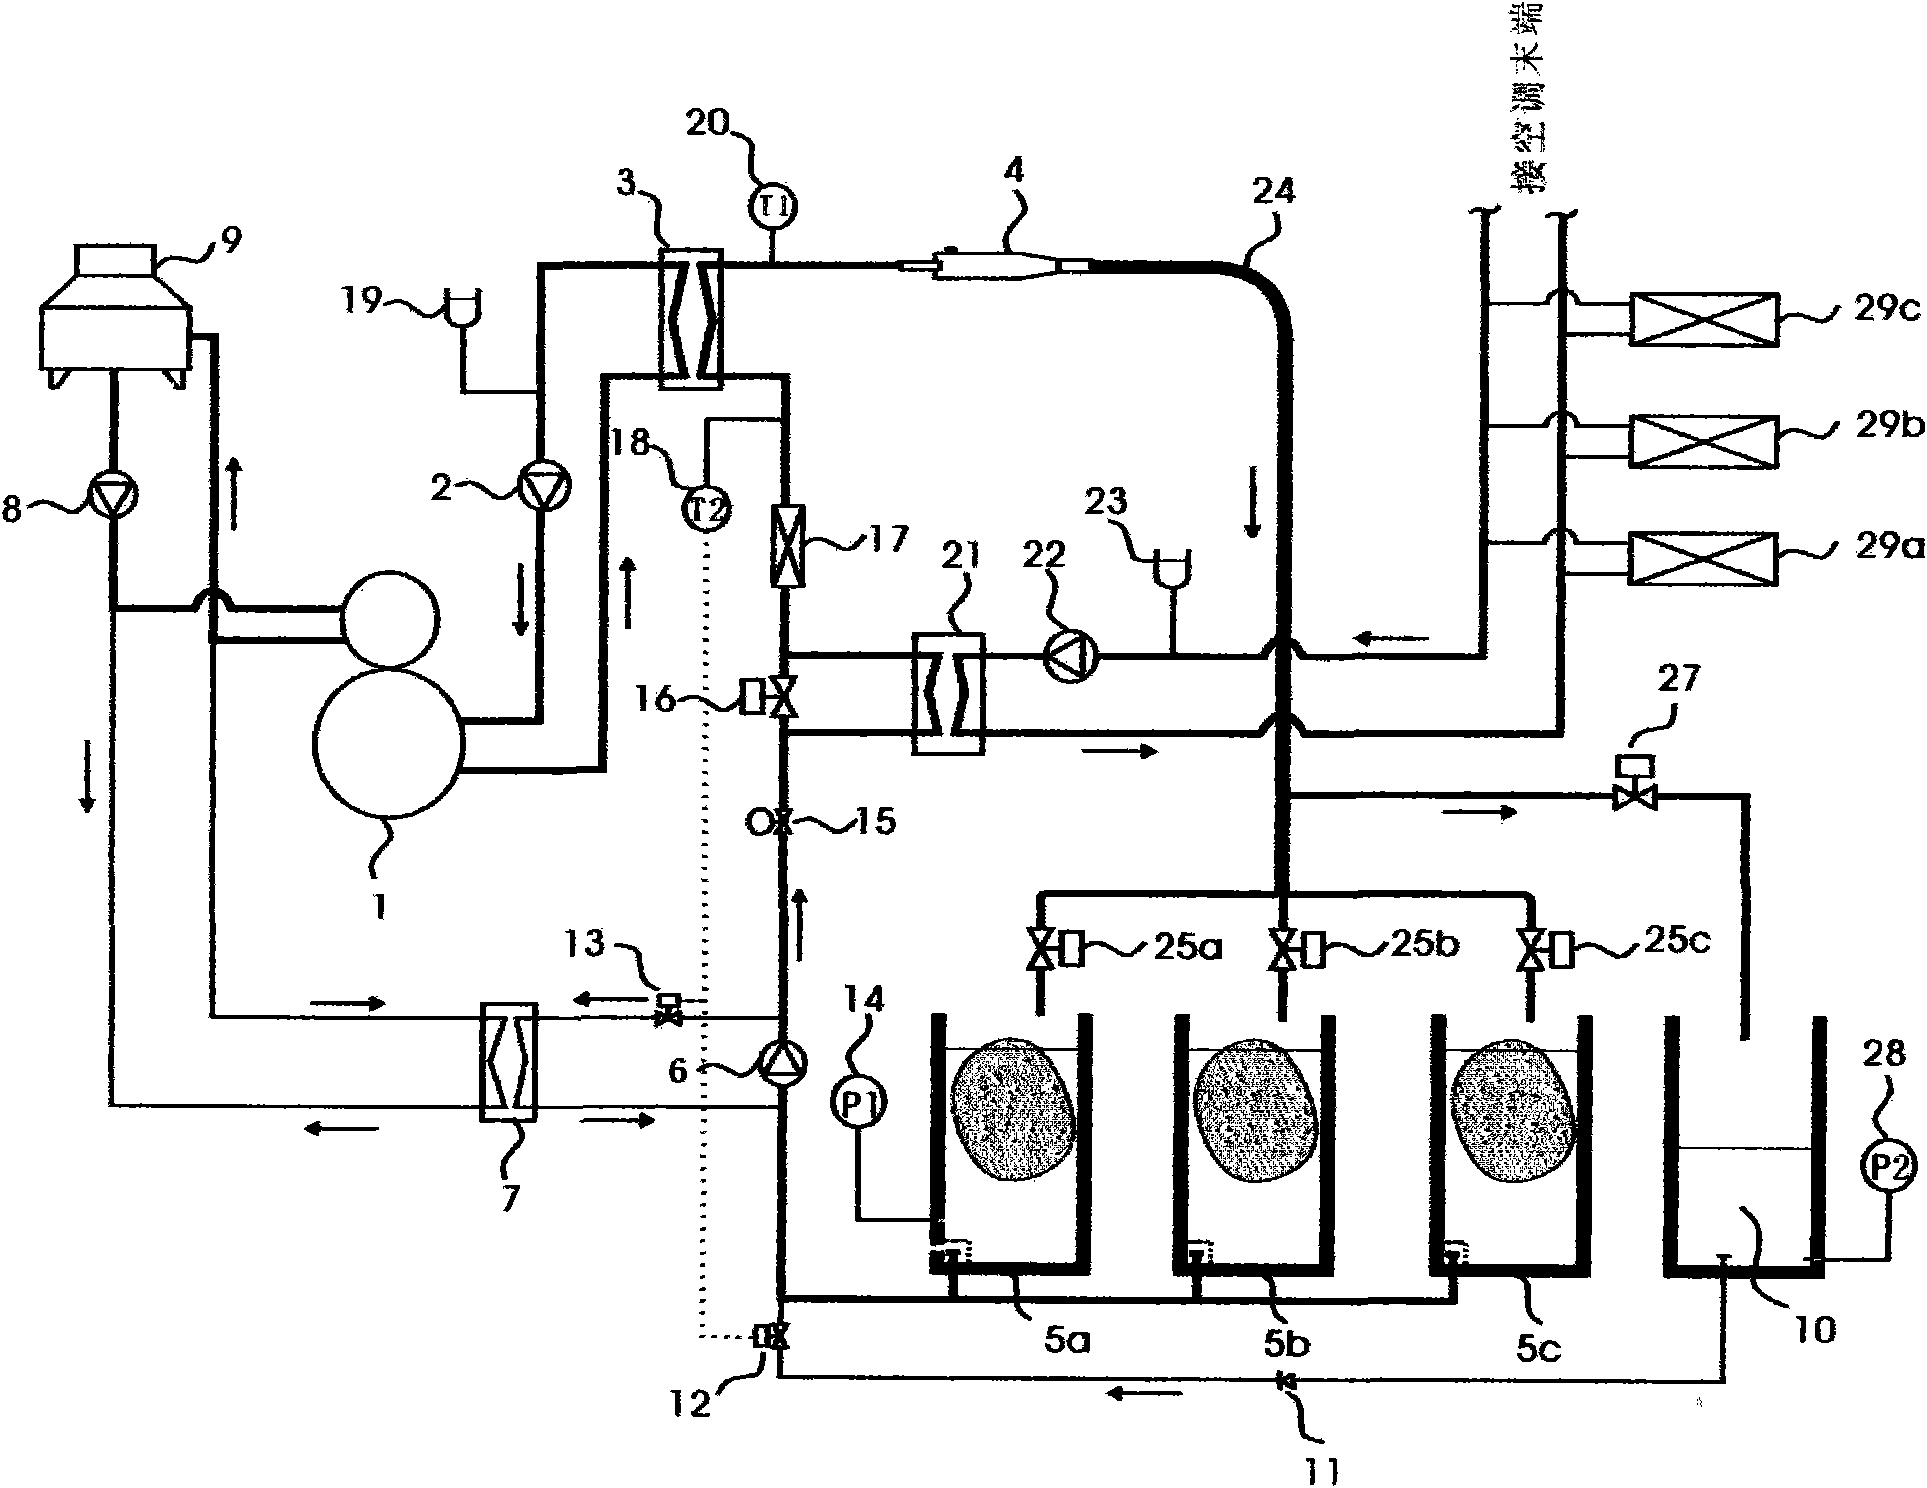 Central air-conditioning system of ice slurry cold storage